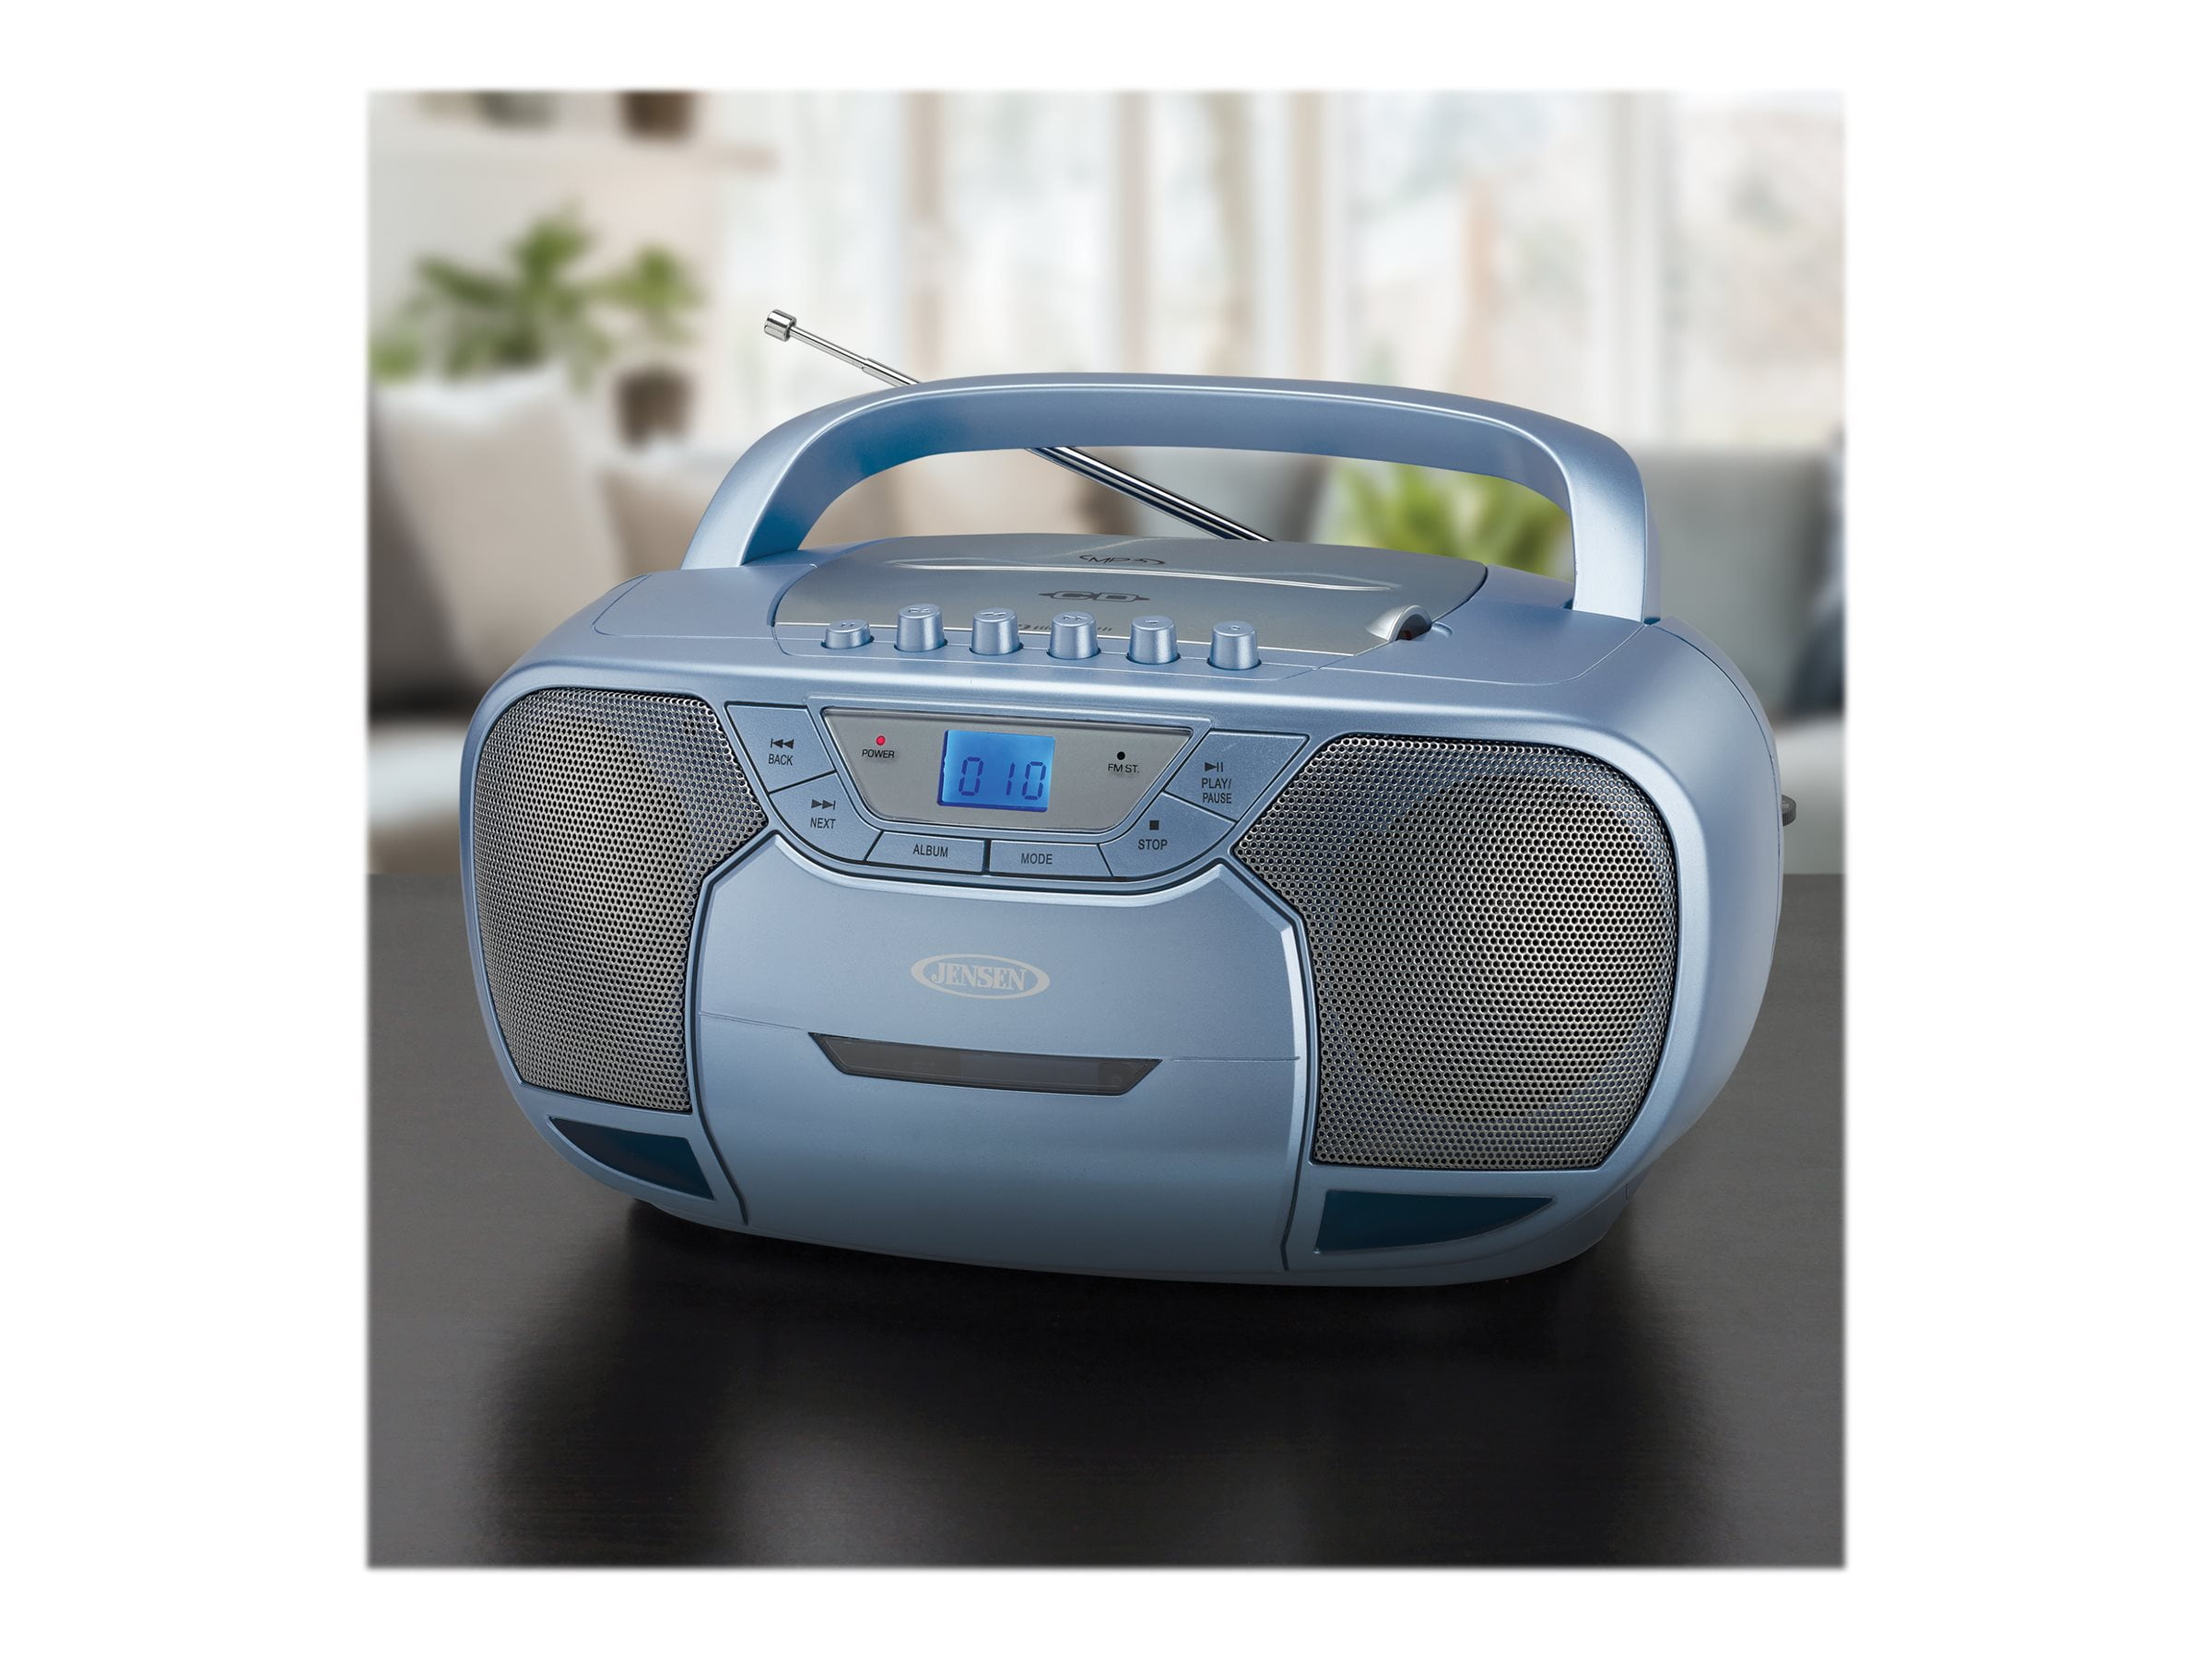  Jensen Stereo CD-590 Portable Bluetooth Home Audio CD/Cassette  Boombox Digital Tuner AM/FM Radio Sound System, Top-Loading MP3 CD Player,  Cassette Player/Recorder - Platinum Exclusive : Electronics